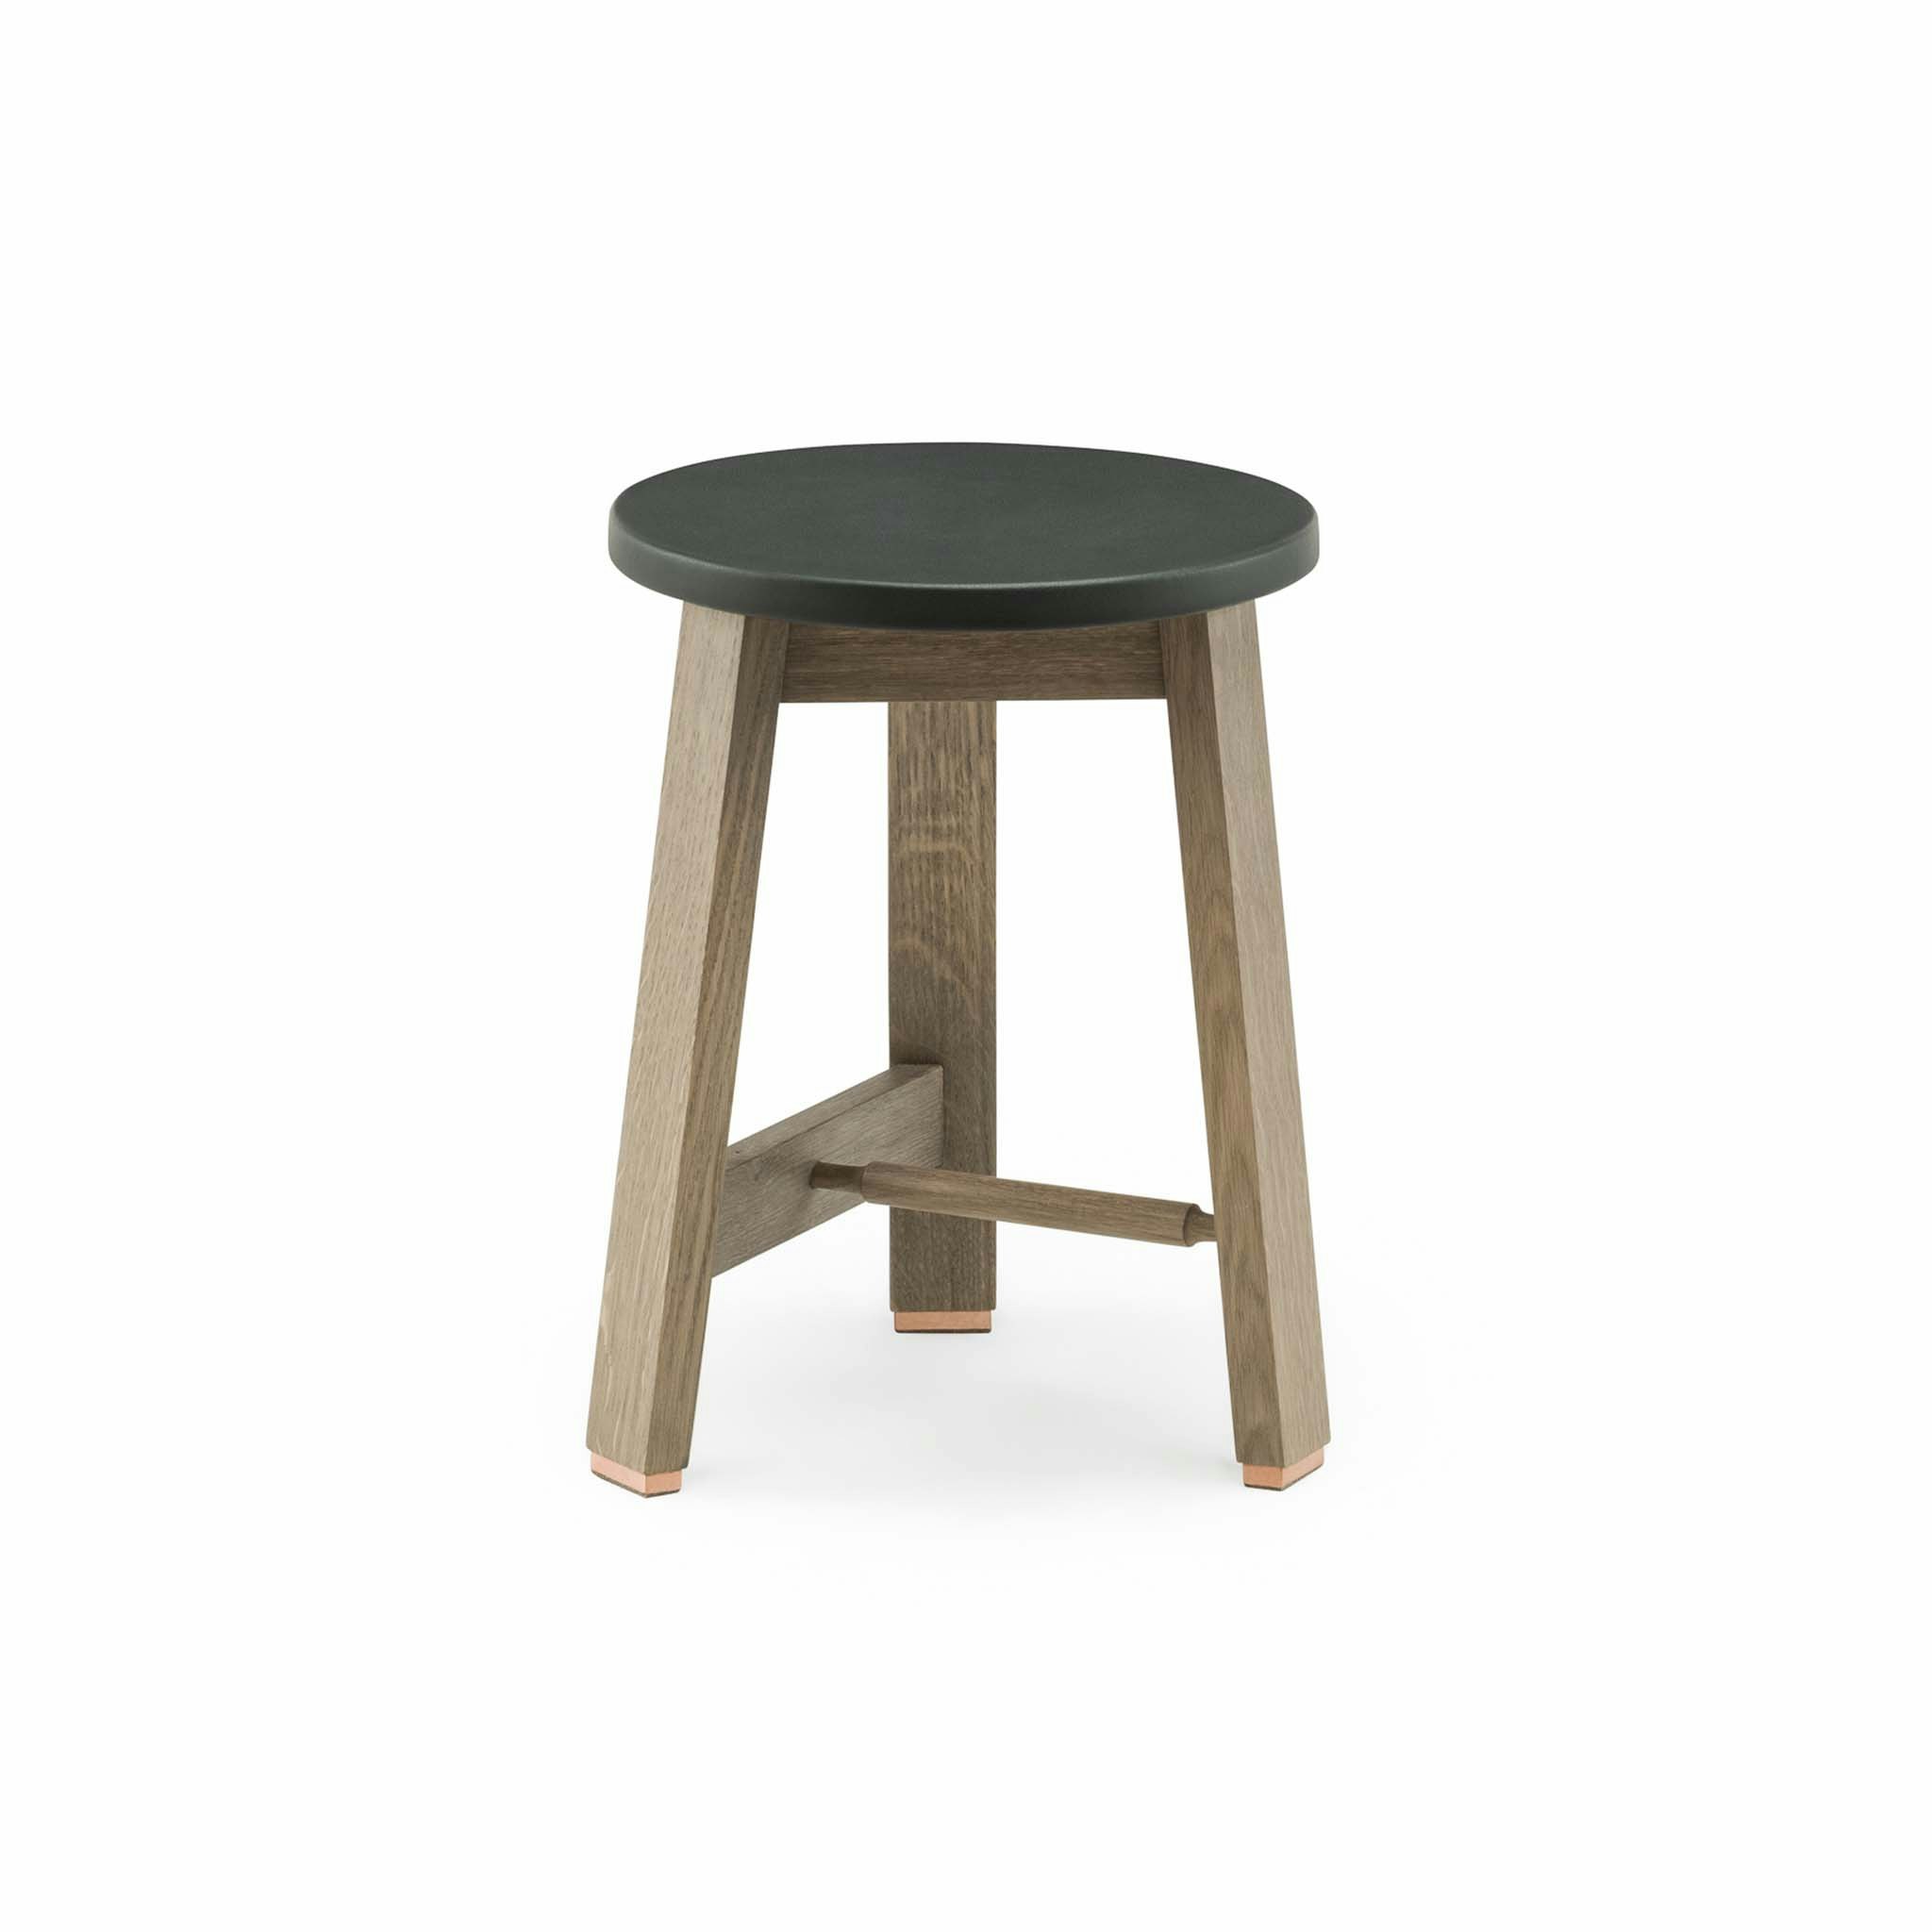 441 Stool Upholstered by Ilse Crawford